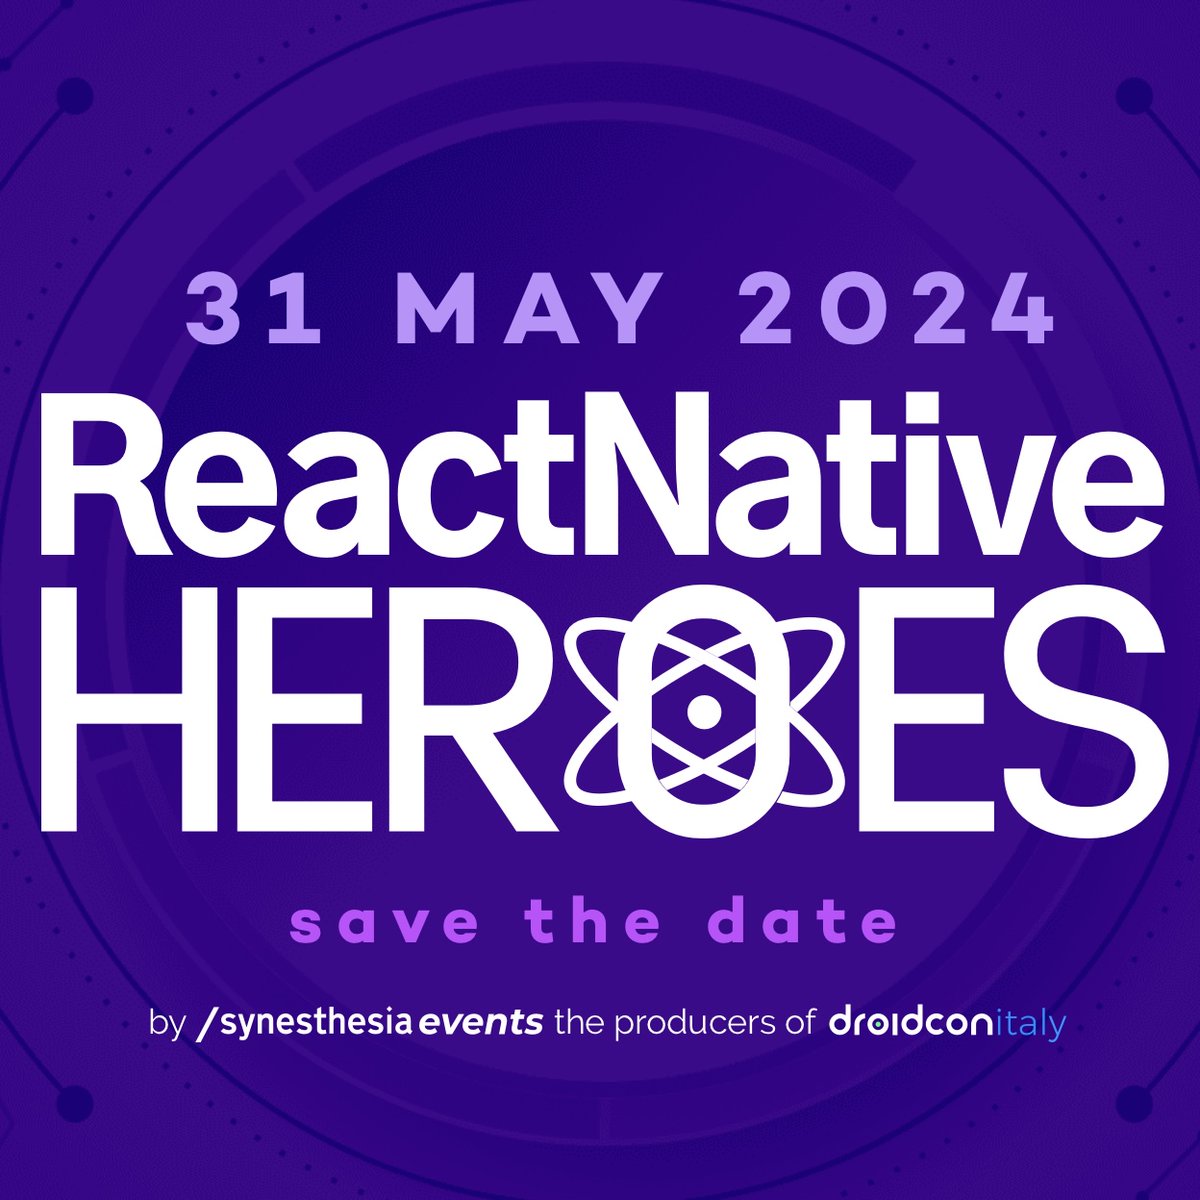 Hey ReactNative Developers, we are almost there📌 If you are enjoying the contents of the 2023 talks, don't miss the opportunity to participate in the 2024 event. Tickets are currently in super sale 🔥🔥 + 400 YT subscribers in the last few weeks, thank you all for the support